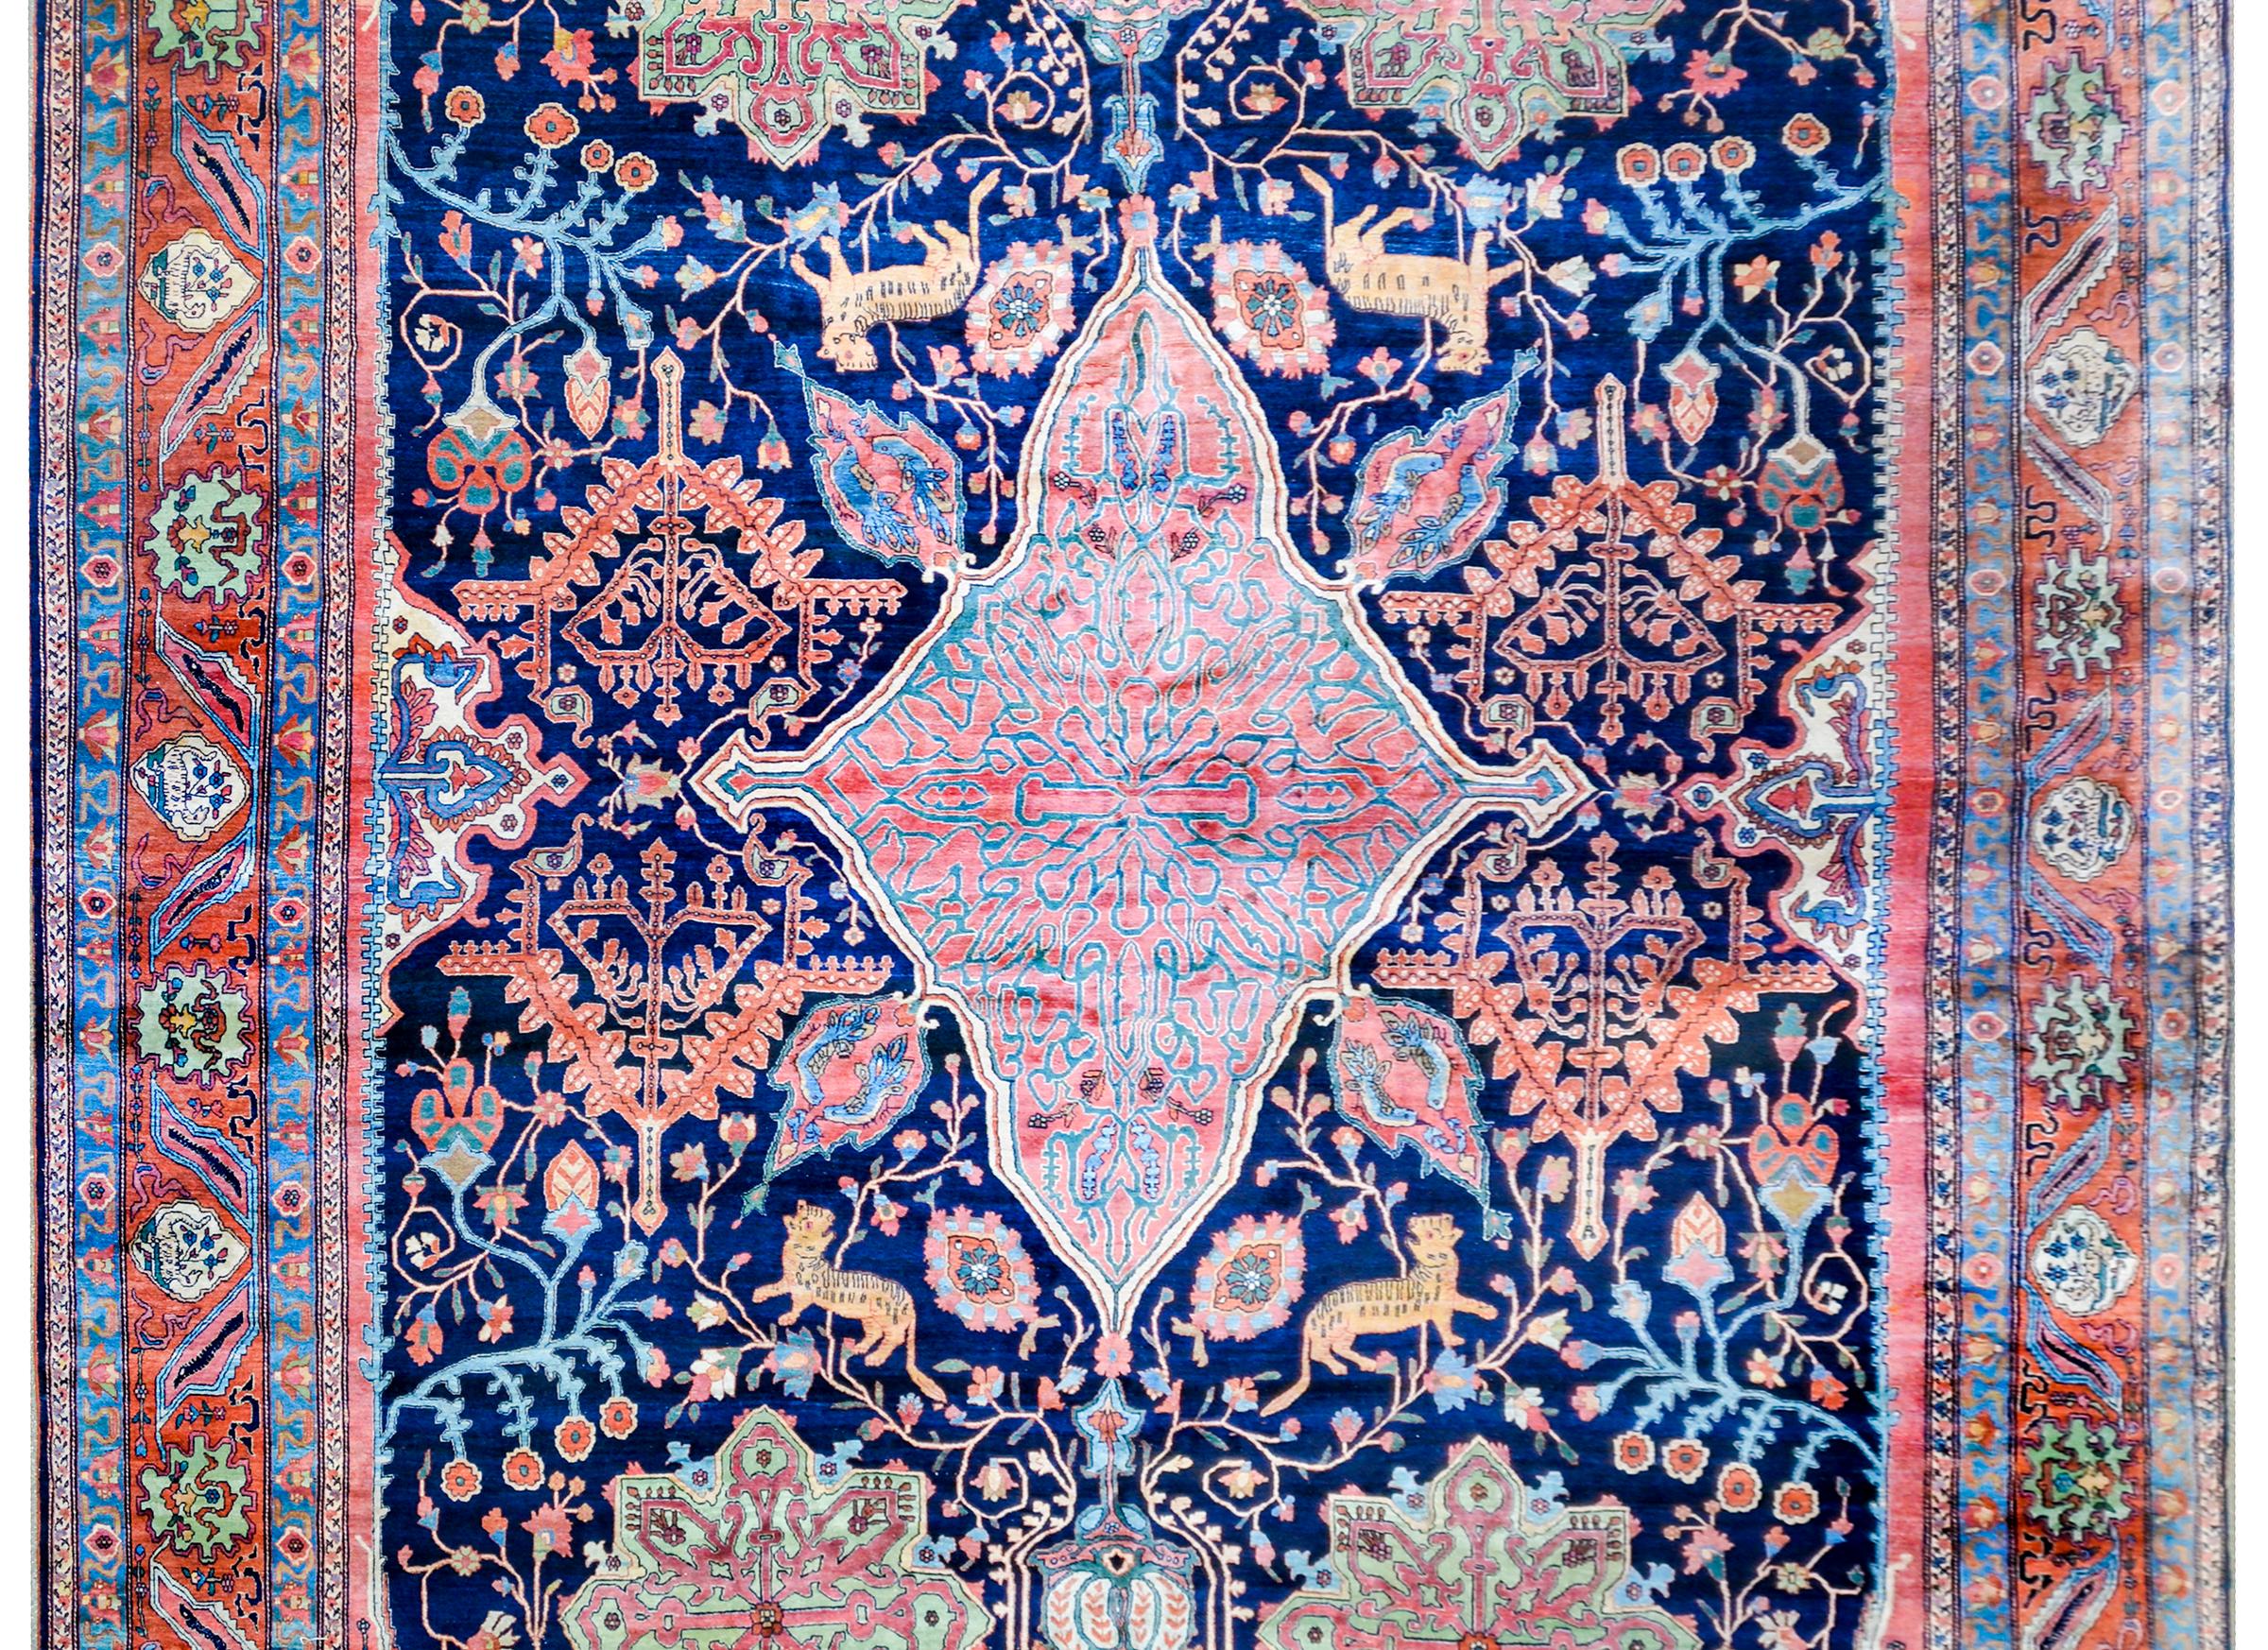 An extraordinary monumental 19th century Sarouk Farahan rug with the most incredible crimson and indigo diamond medallion amidst the most incredible scrolling vine and myriad flowering branch patterned field on a bold dark indigo background. Hungry